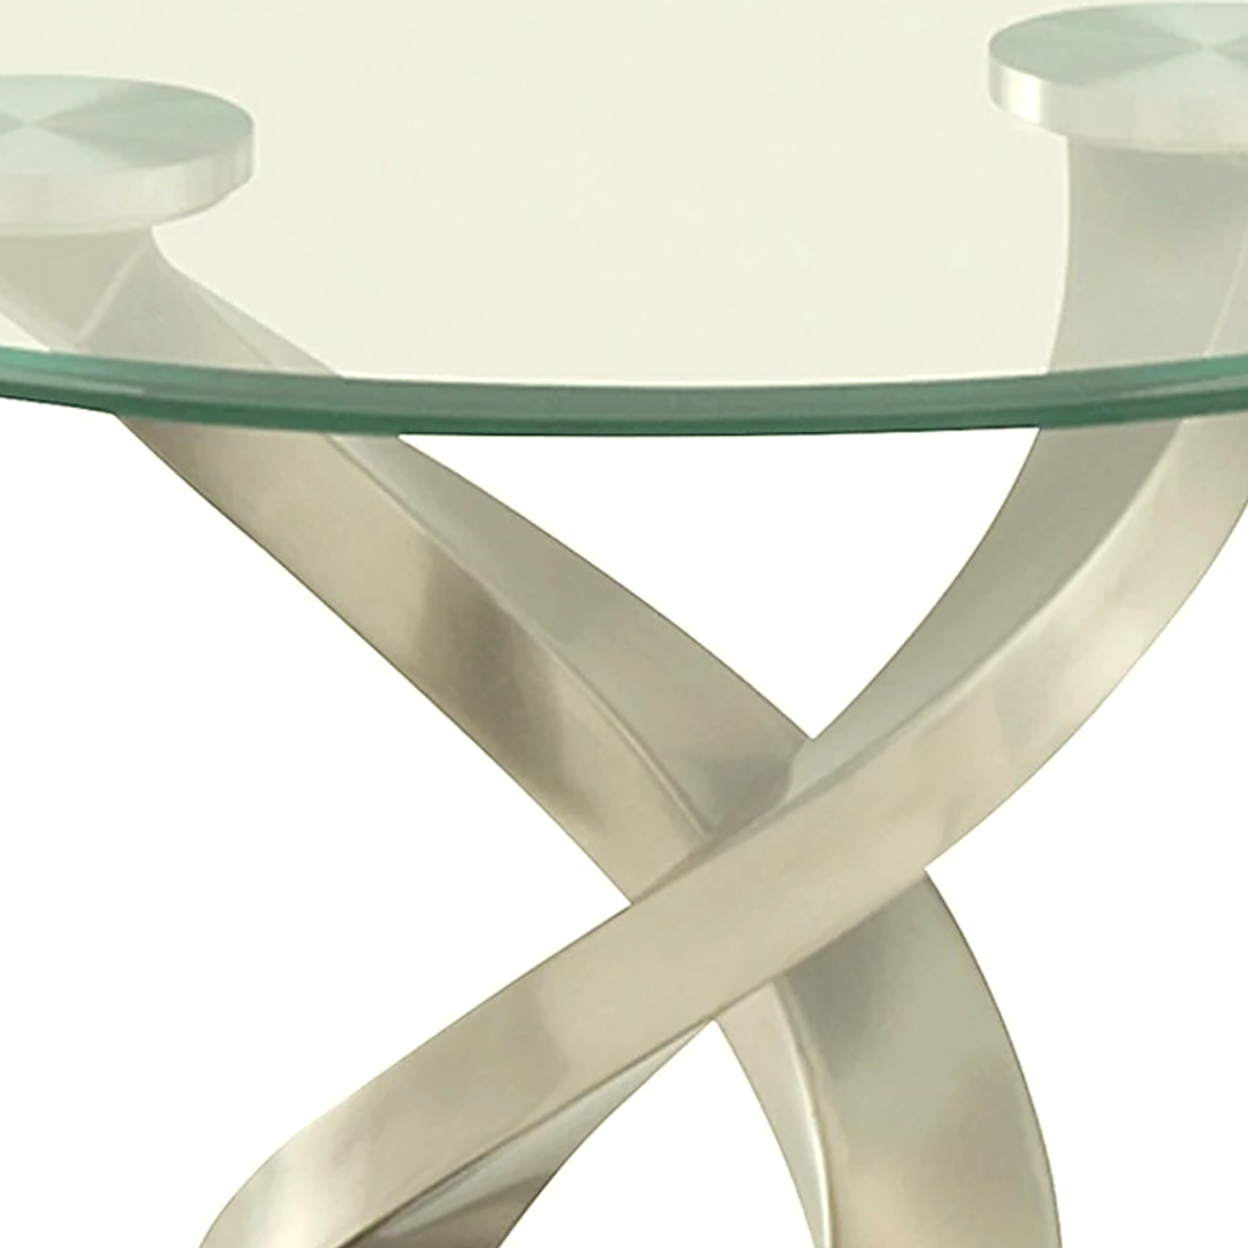 Modern Round Glass Top End Table With Twisted Metal Base, Silver And Black- Saltoro Sherpi